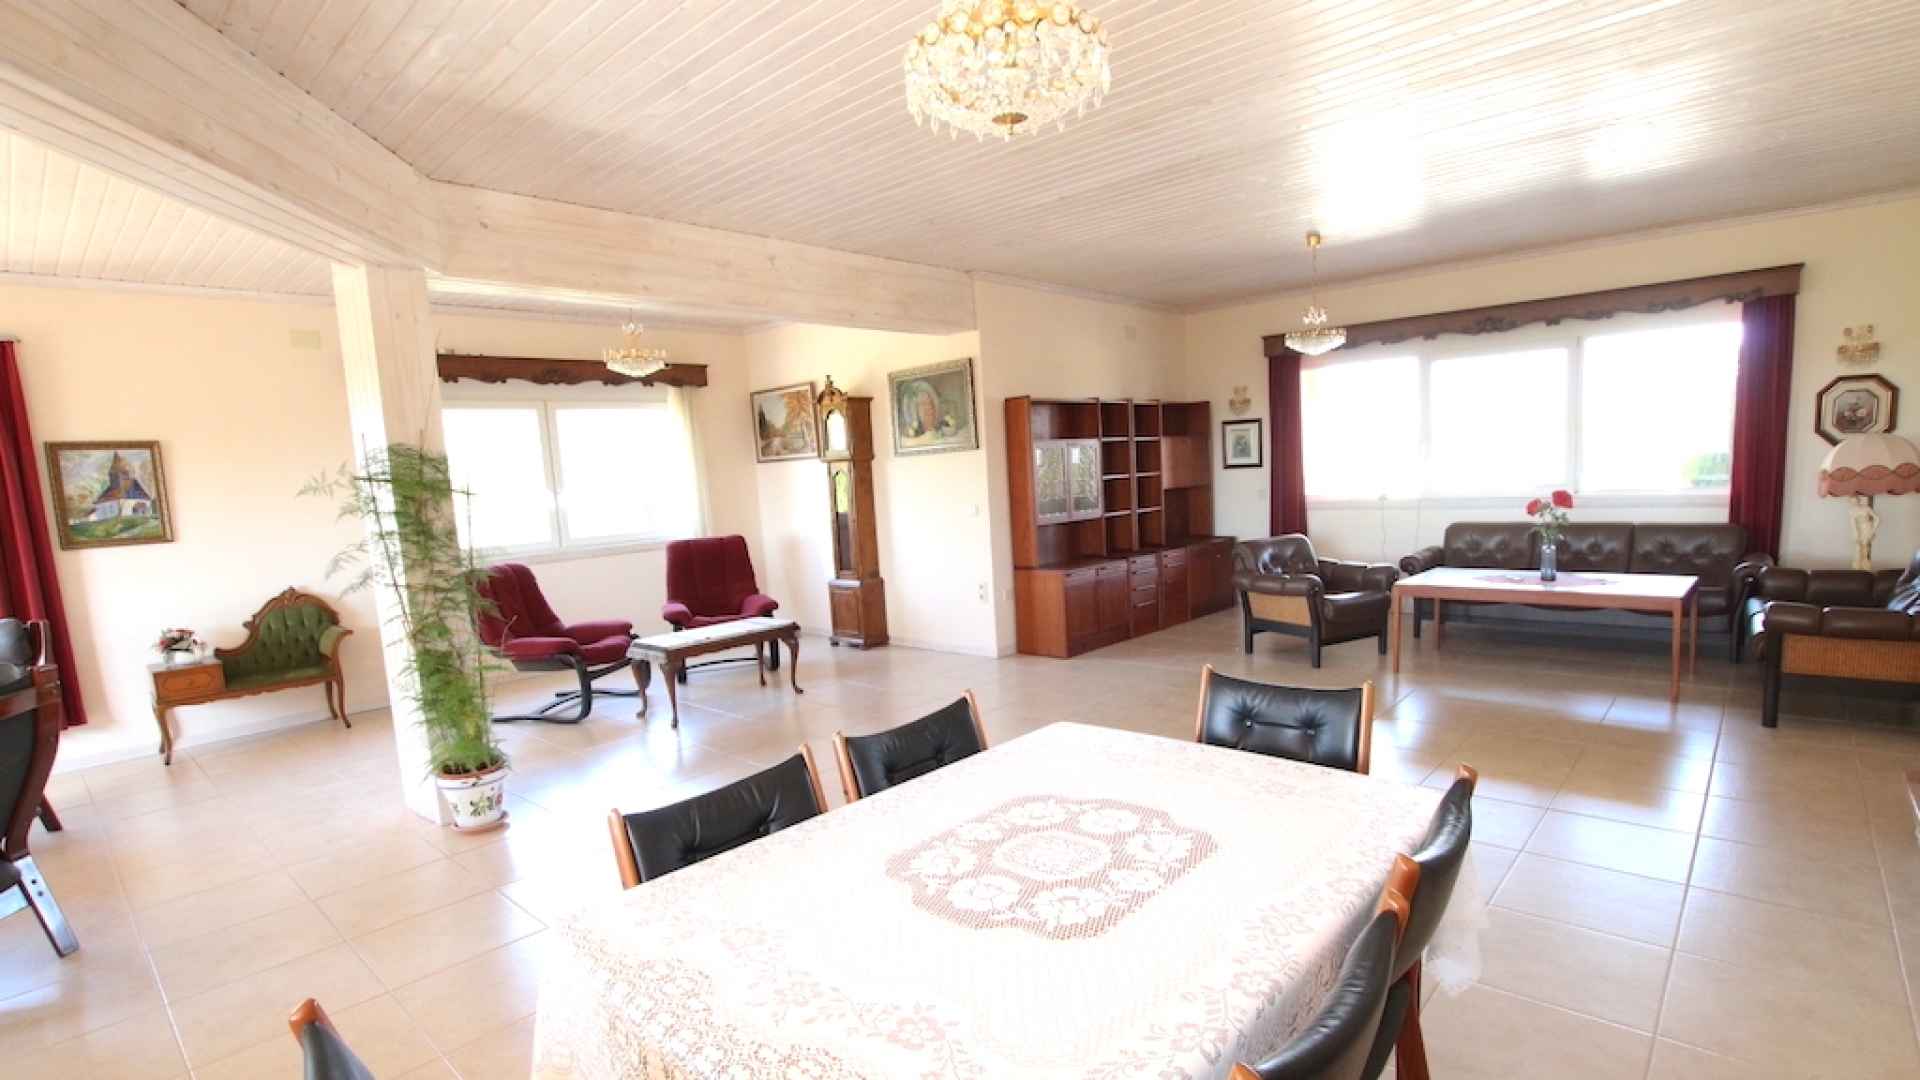 48018_charming_3_bedroom_country_villa_with_many_extras_200323130123_img_8597